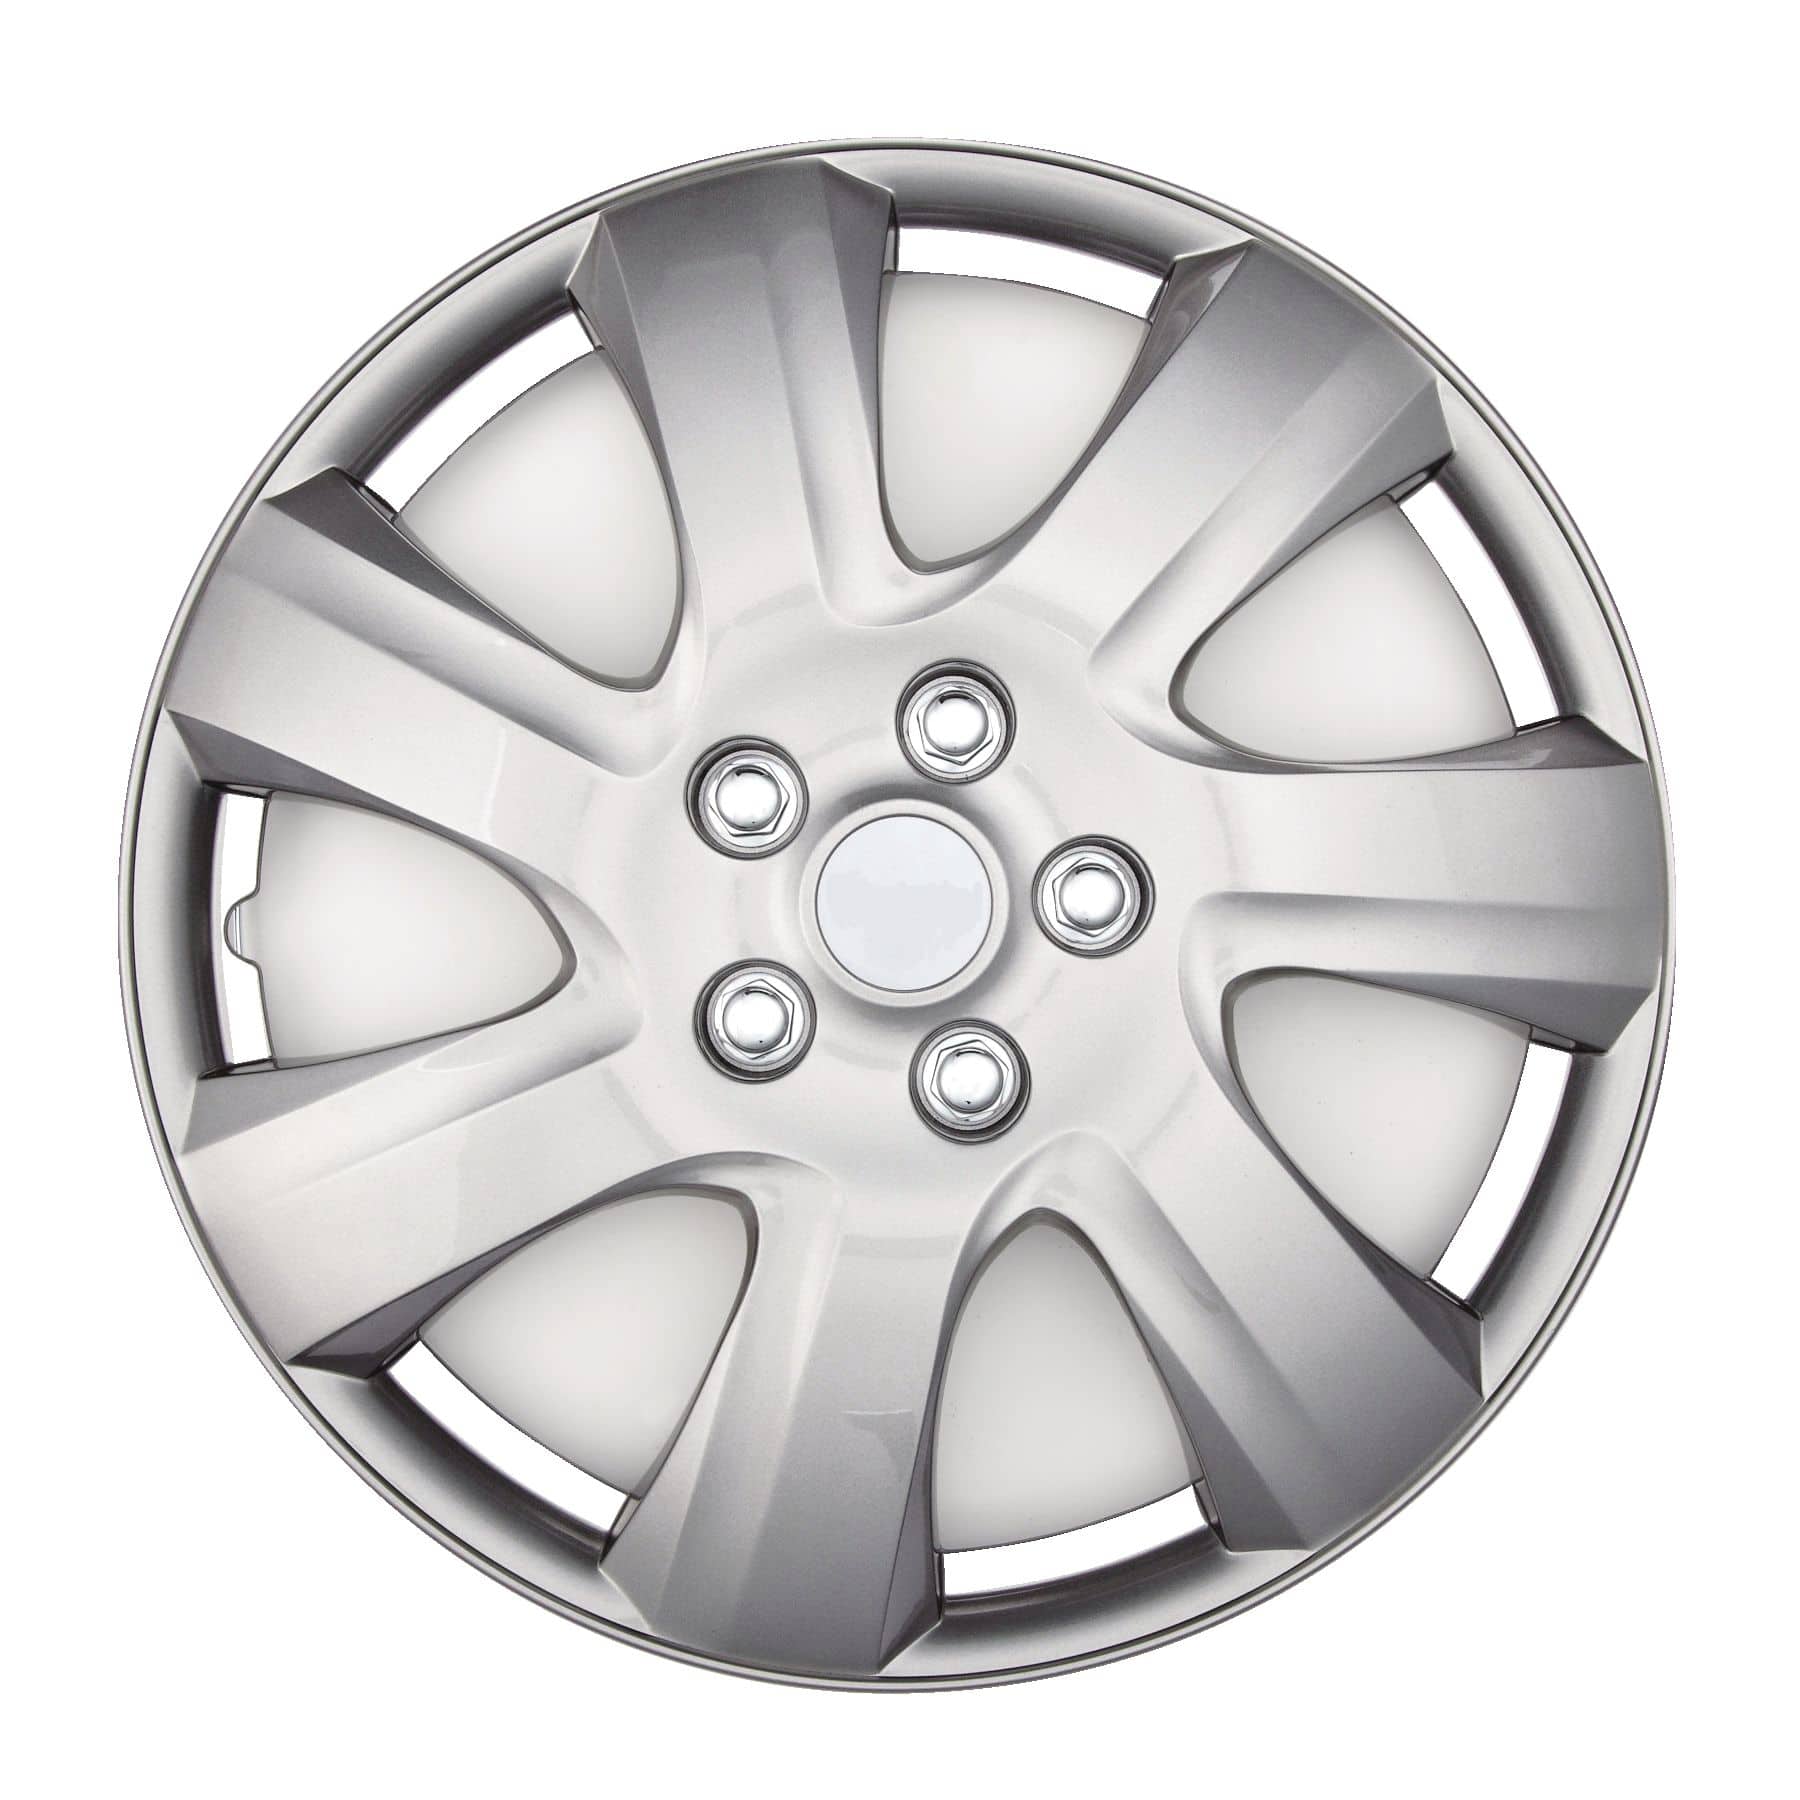 16 Inch Silver Wheel Cover Set, Shop Today. Get it Tomorrow!